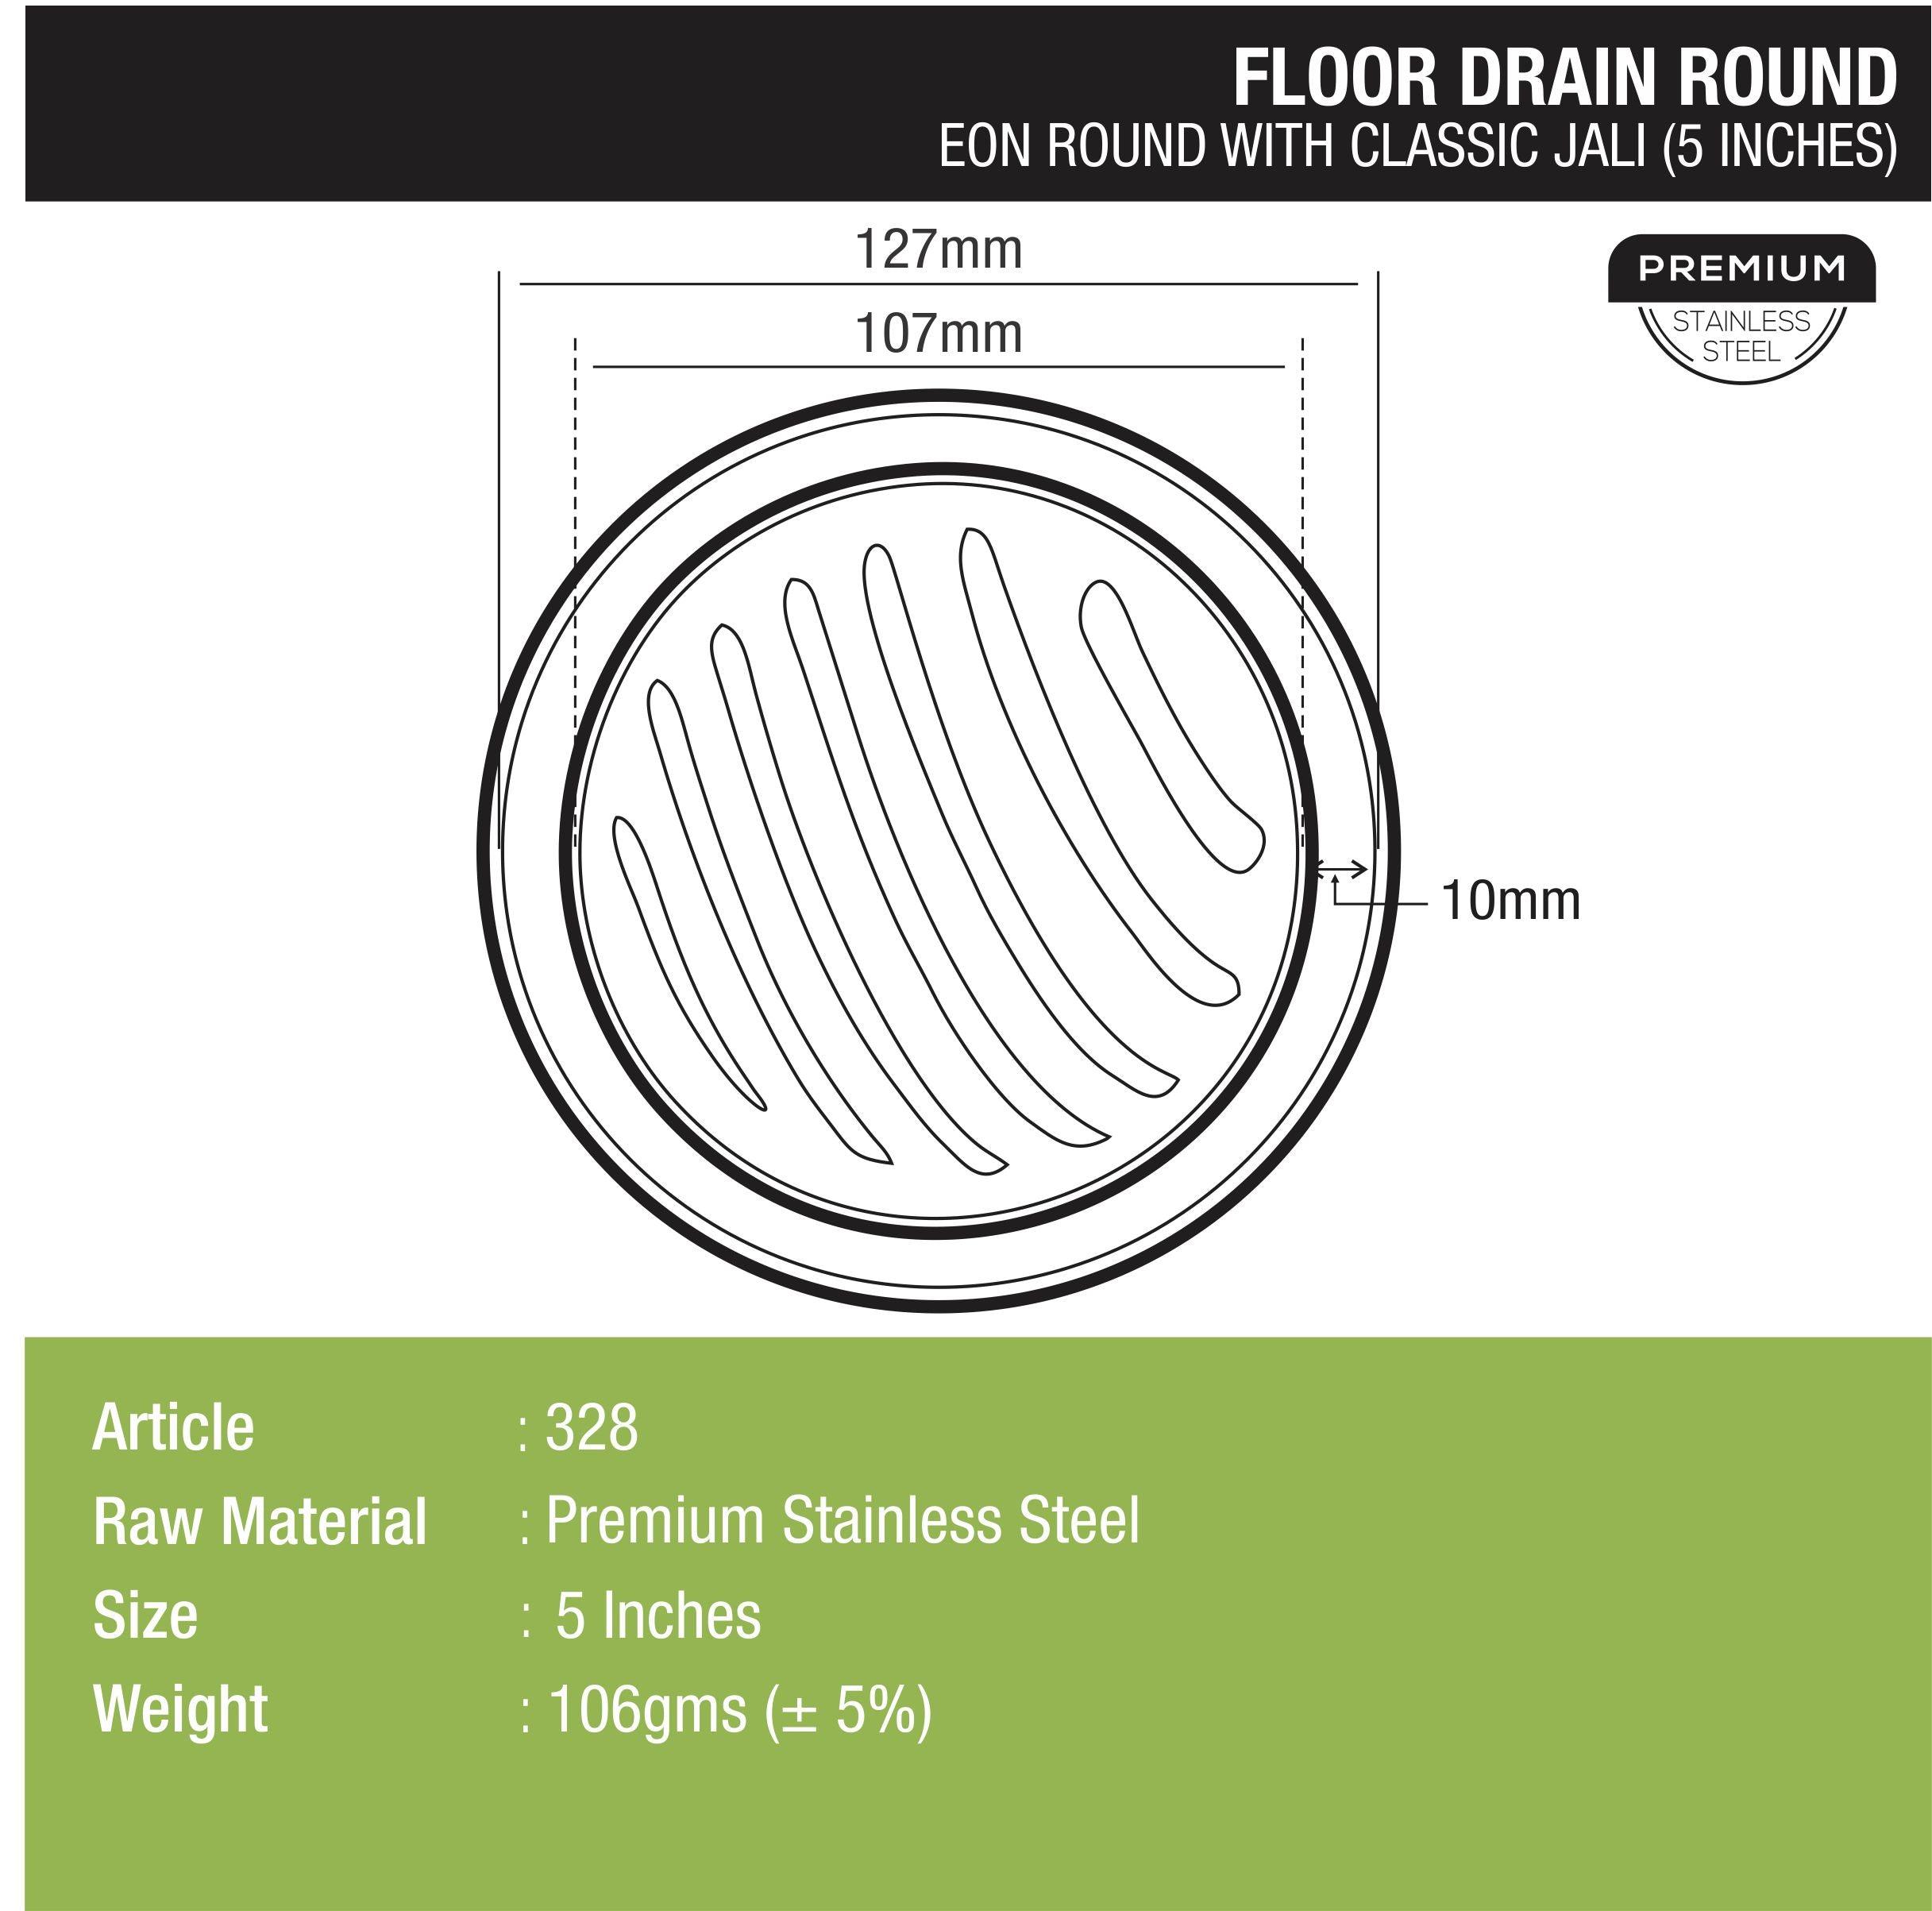 Eon Round Floor Drain with Classic Jali (5 inches) dimensions and sizes